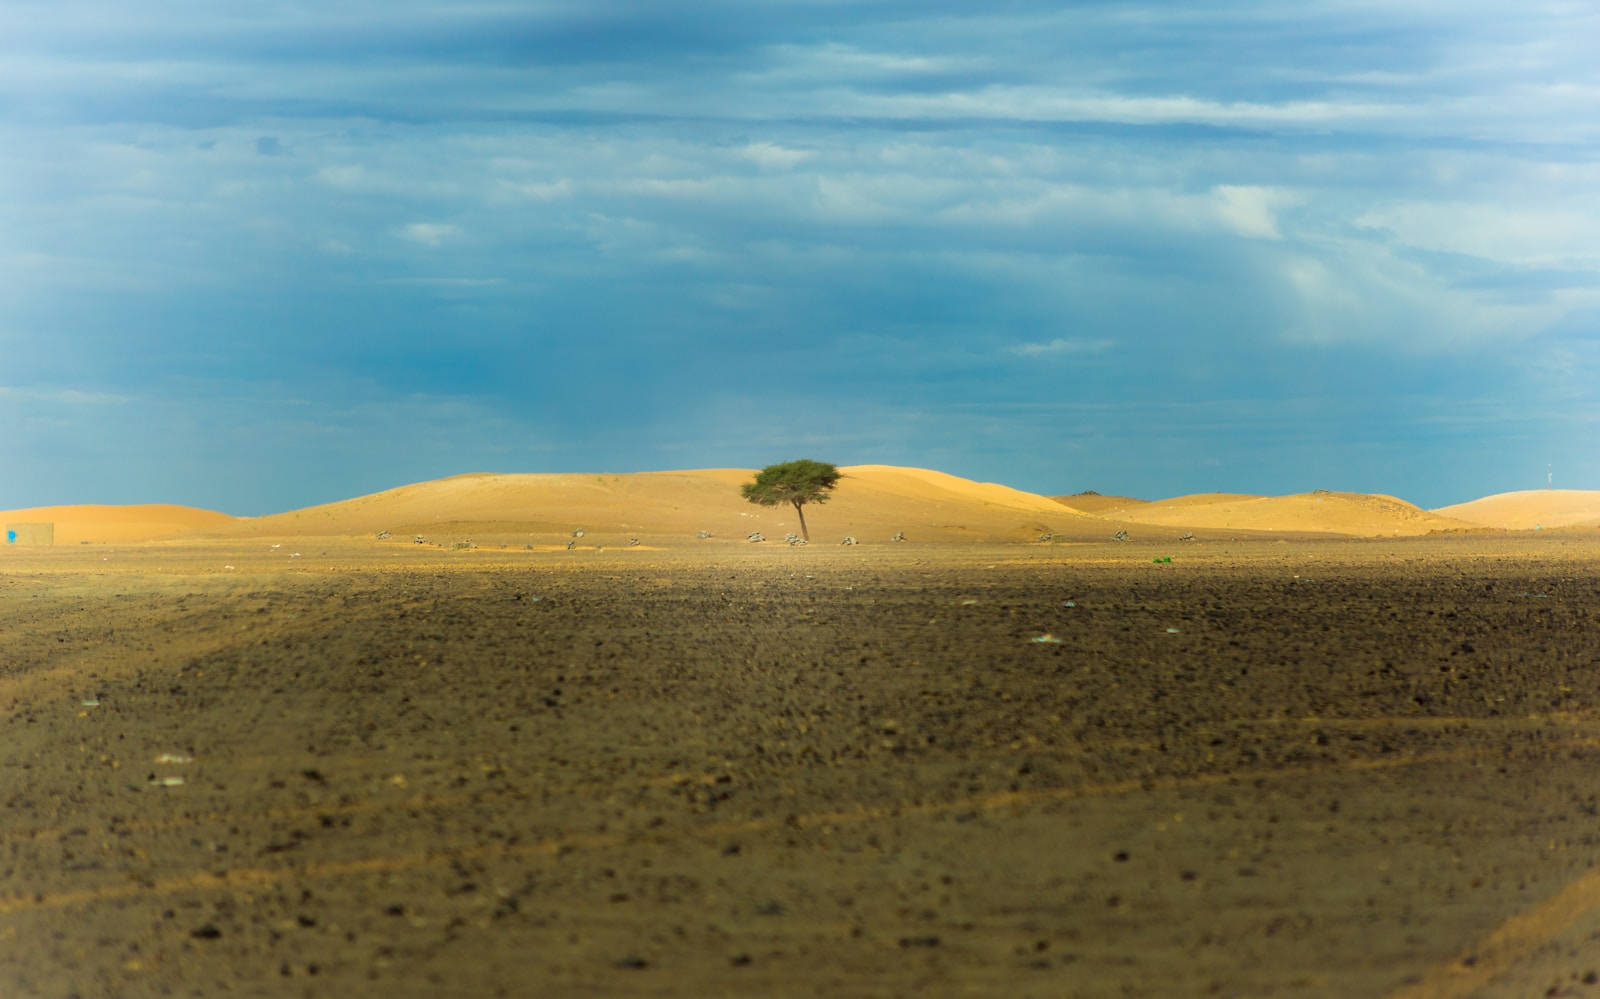 lone tree in middle of desert during daytime representing being resilient and resilience